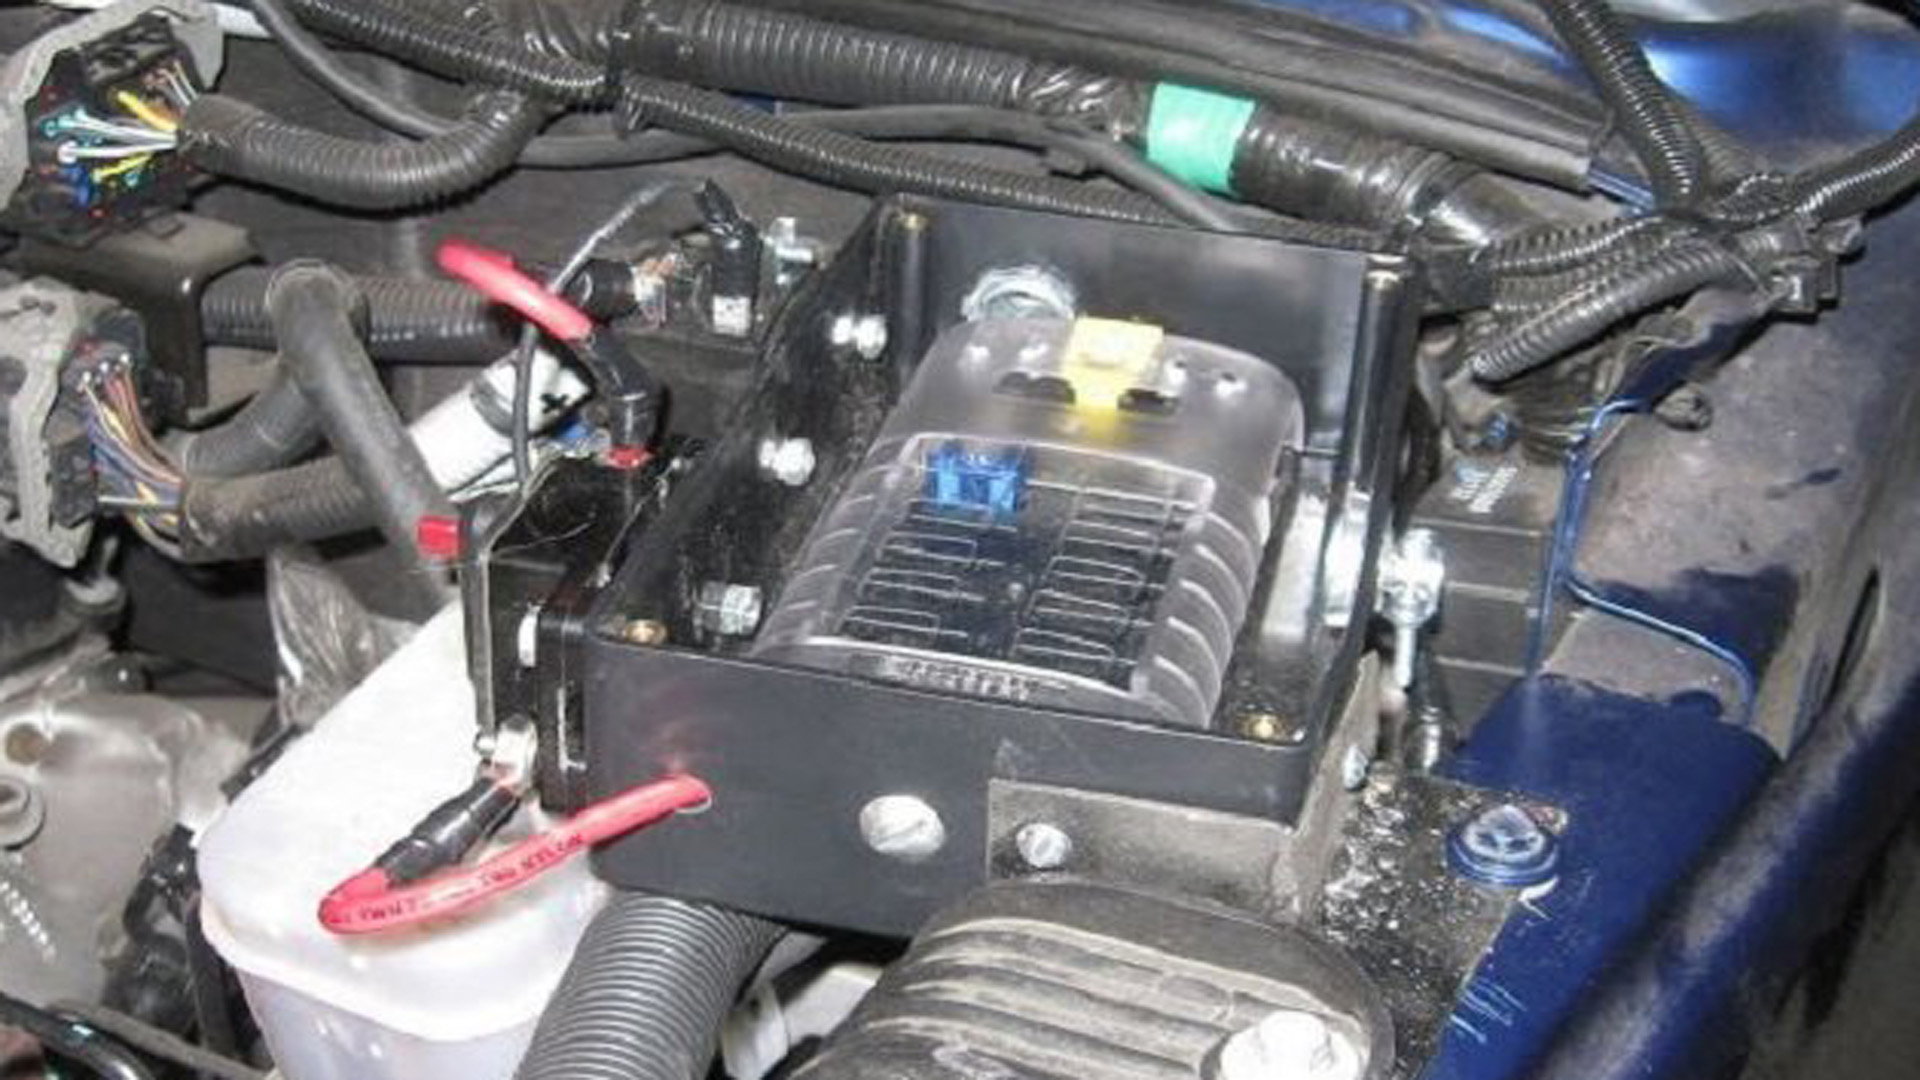 Jeep Wrangler JK: How to Install Auxiliary Fuse Box | Jk-forum